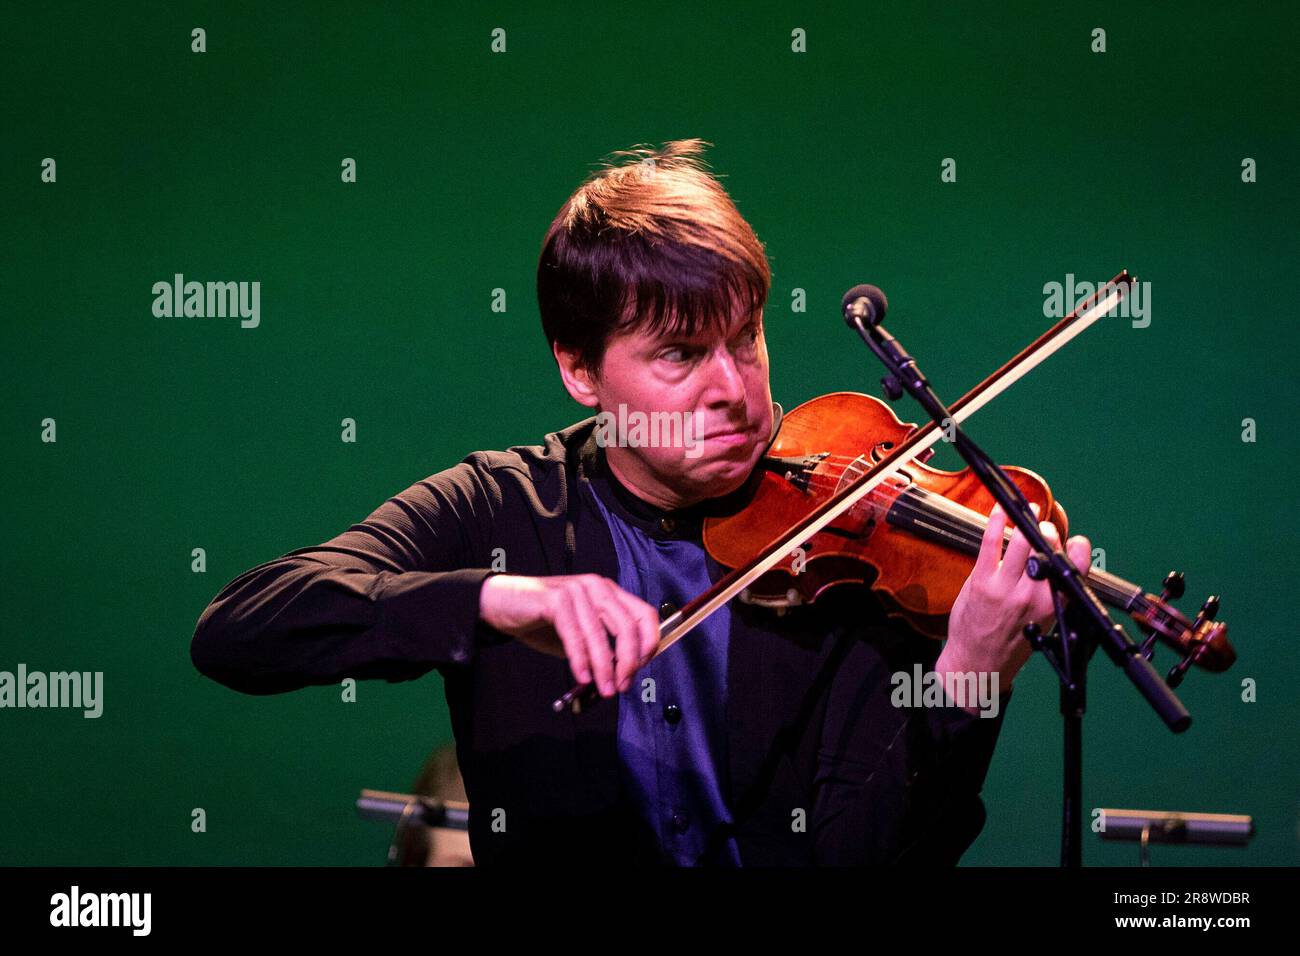 Washington, DC, USA. 22nd June, 2023. Joshua Bell, violinist, performs during a state dinner at the White House in Washington, DC, US, on Thursday, June 22, 2023. Biden and Modi announced a series of defense and commercial deals designed to improve military and economic ties between their nations during a state visit today. Credit: Al Drago/Pool via CNP/dpa/Alamy Live News Stock Photo